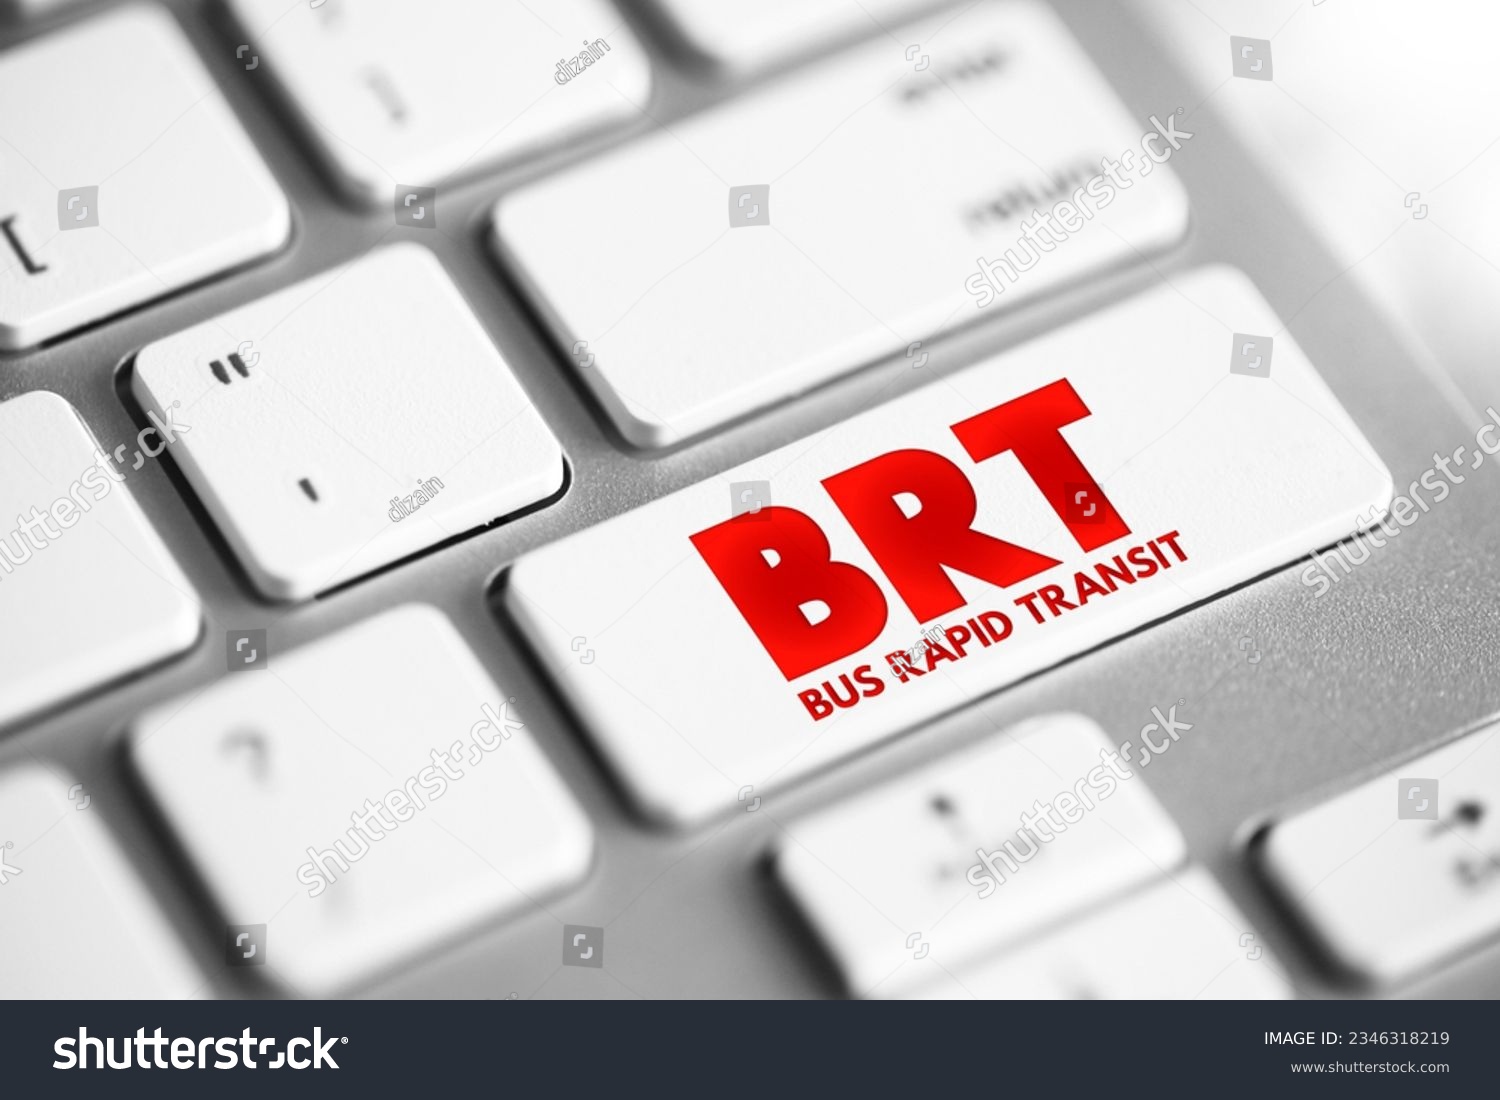 BRT - Bus Rapid Transit is a bus-based public transport system designed to have better capacity and reliability than a conventional bus system, acronym text button on keyboard #2346318219